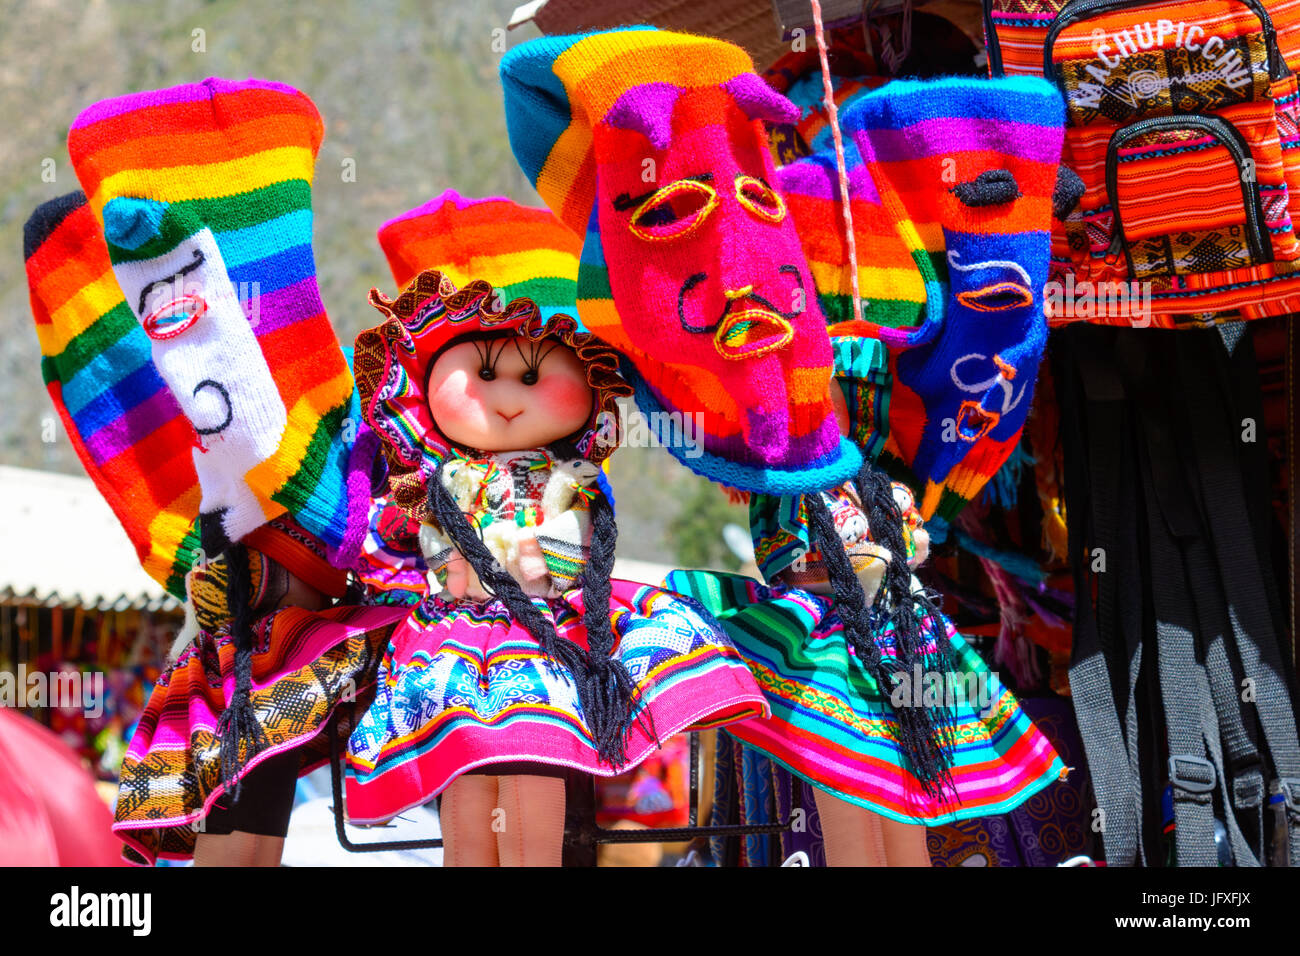 Colourful goods for sale in souvenir shop in Ollantaytambo, Peru. Ollantaytambo is a town and an Inca archaeological site in Peru. Stock Photo